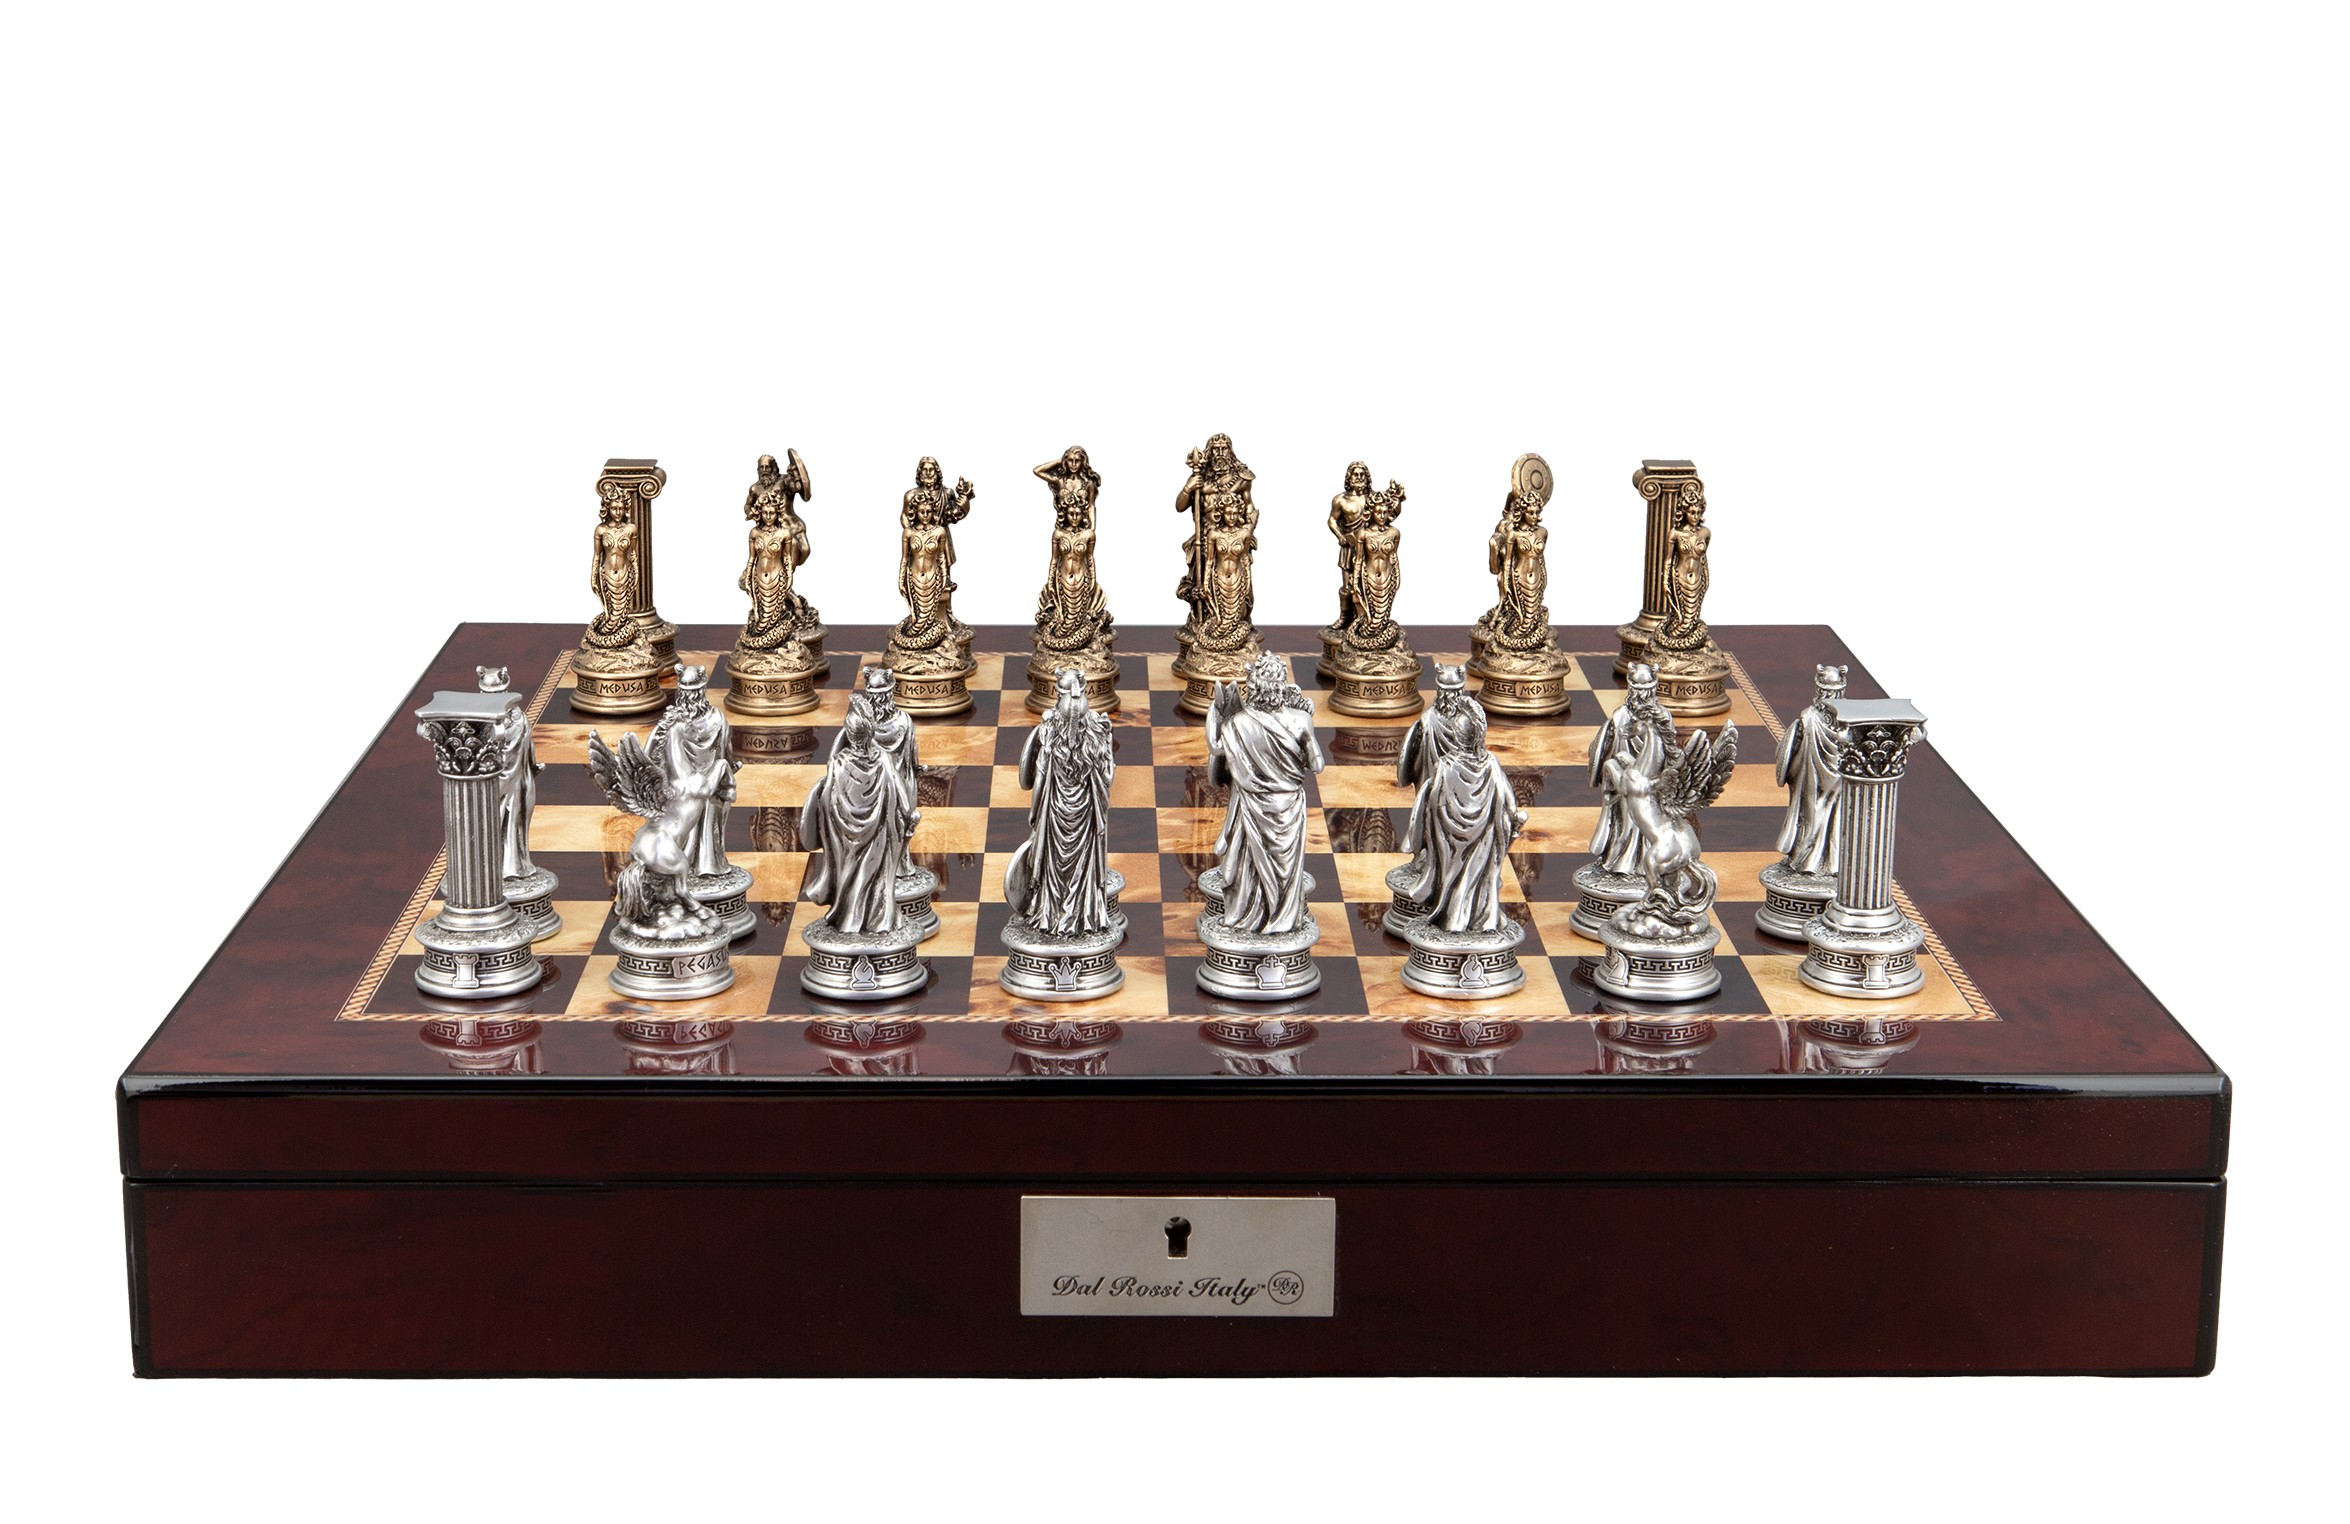 Dal Rossi Italy European Warriors on a Mahogany Finish, Chess Box 20” with compartments